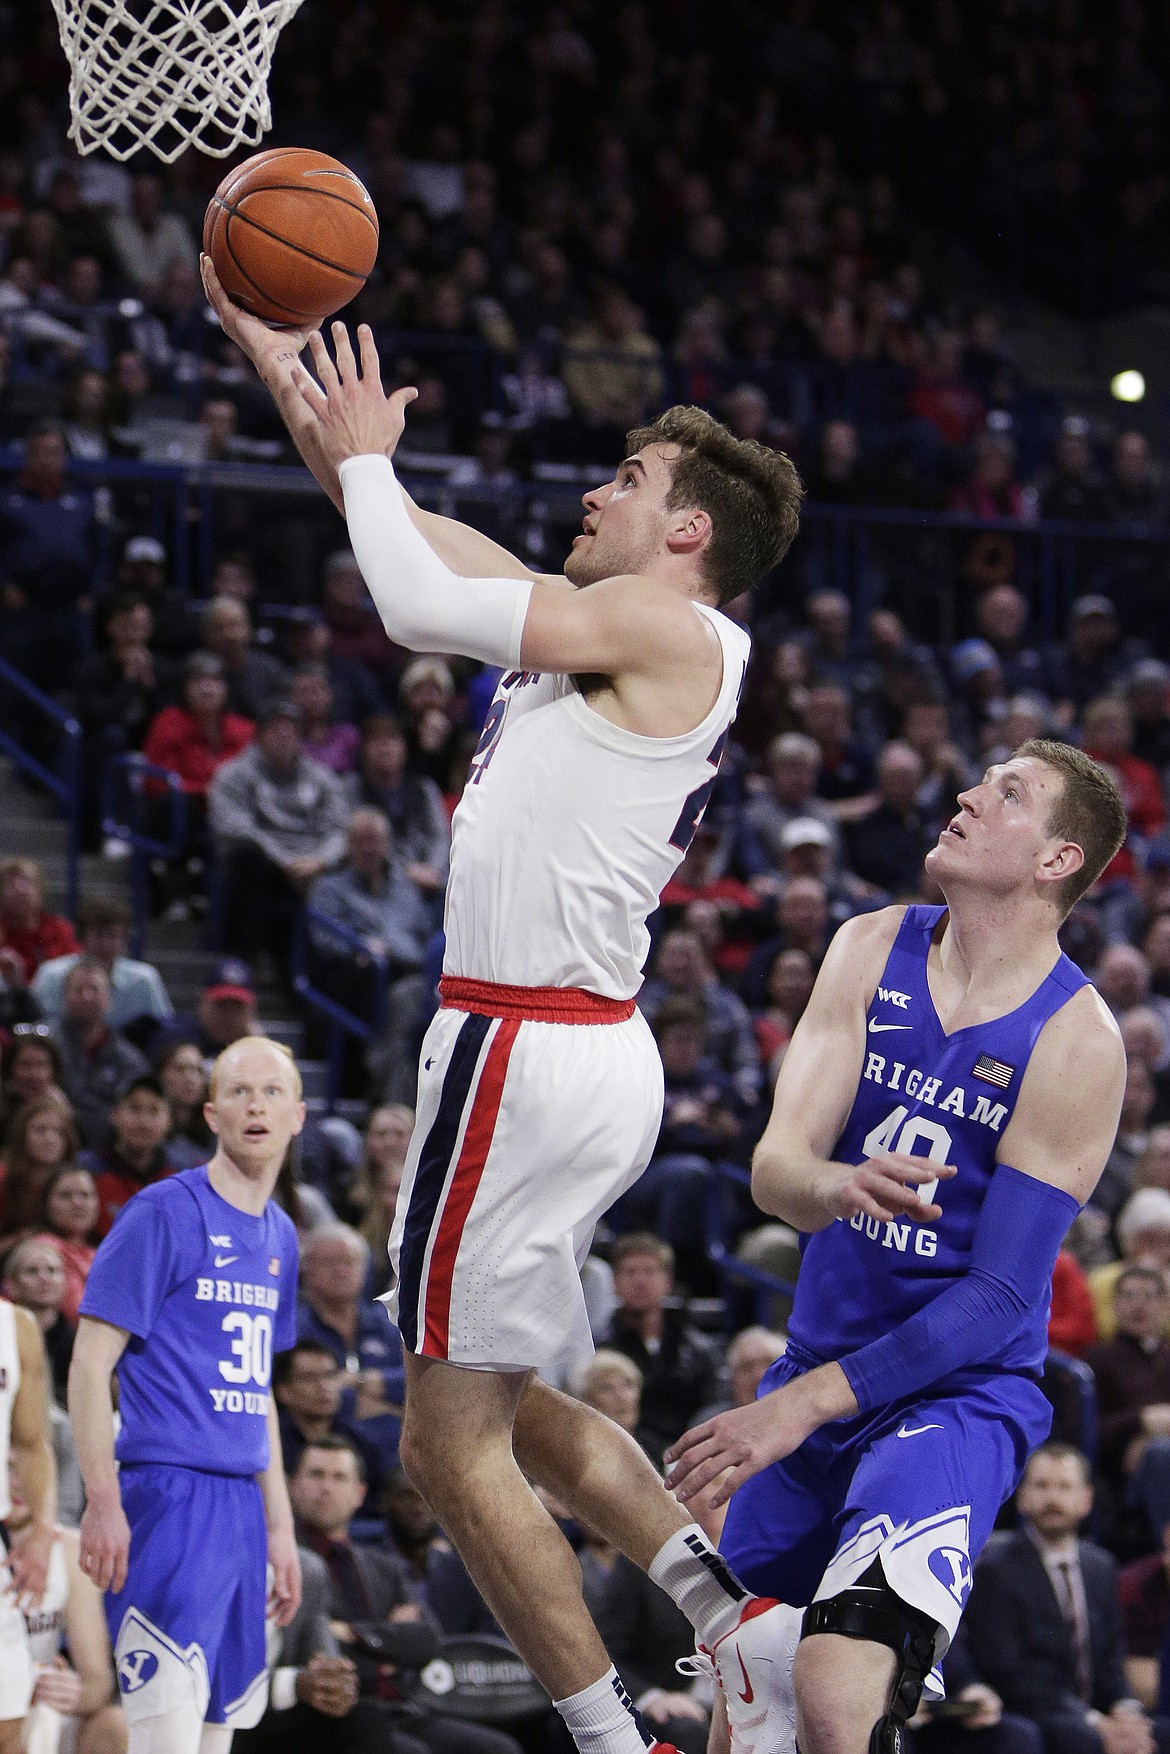 AP Photo/Young Kwak
Gonzaga forward Corey Kispert drives to the basket during the Bulldogs’ 92-69 win over visiting BYU on Jan. 18, 2020.